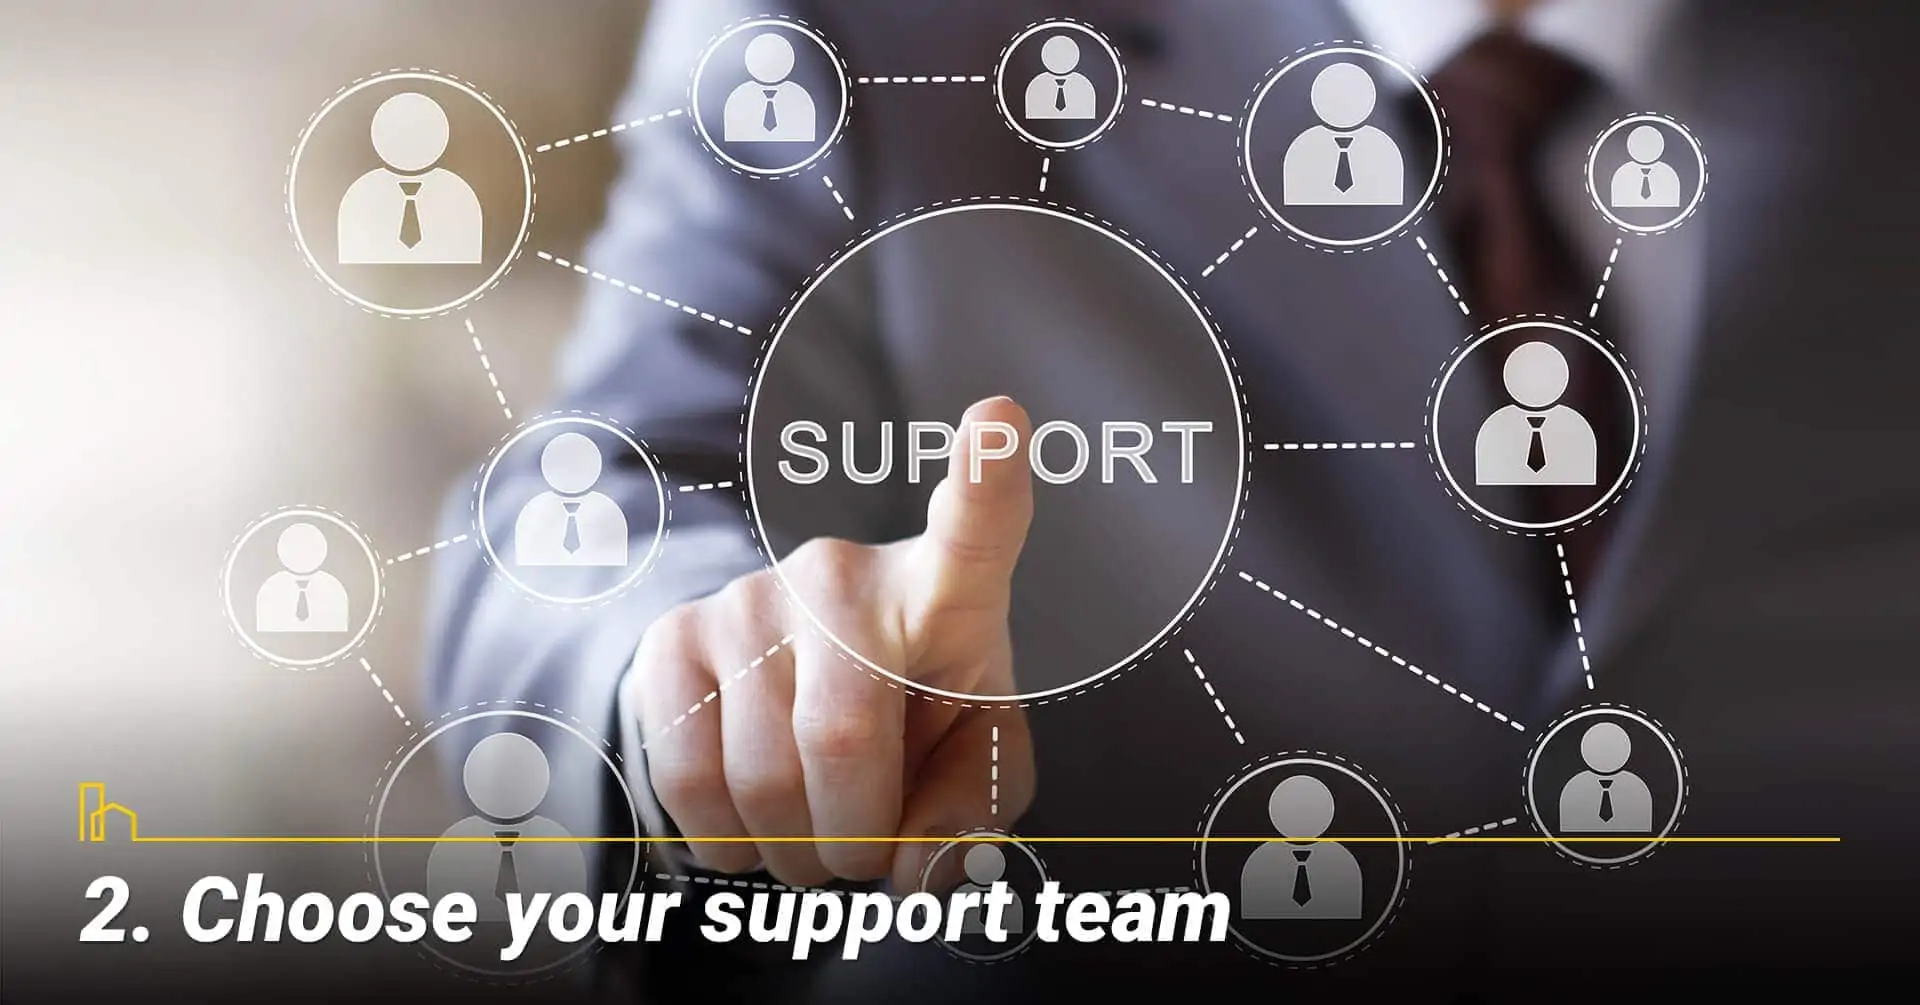 Choose your support team, select members and build your team